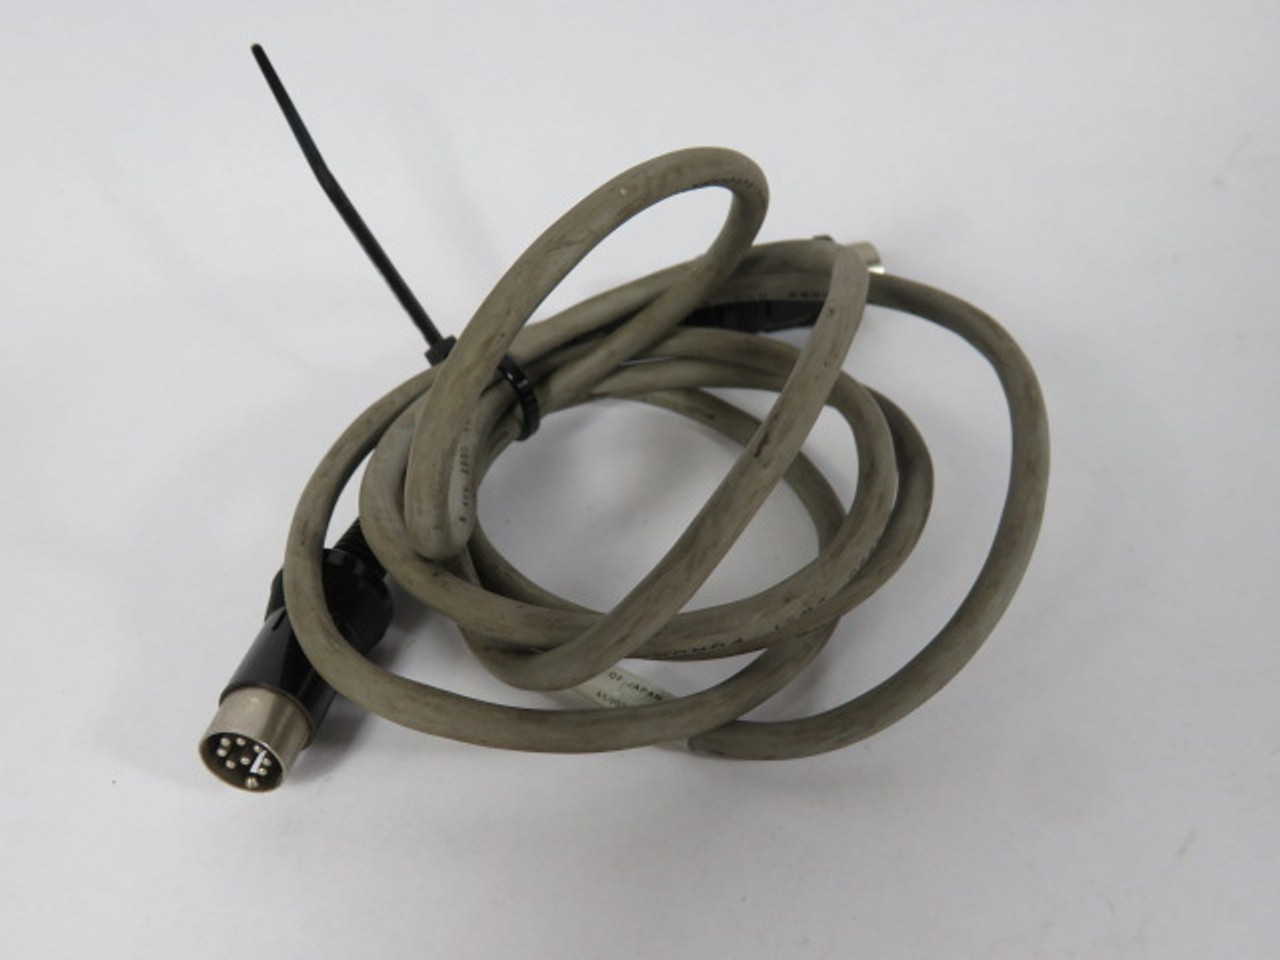 Allen-Bradley 1745-C1 Series B 6' Long Programmer Interconnect Cable USED